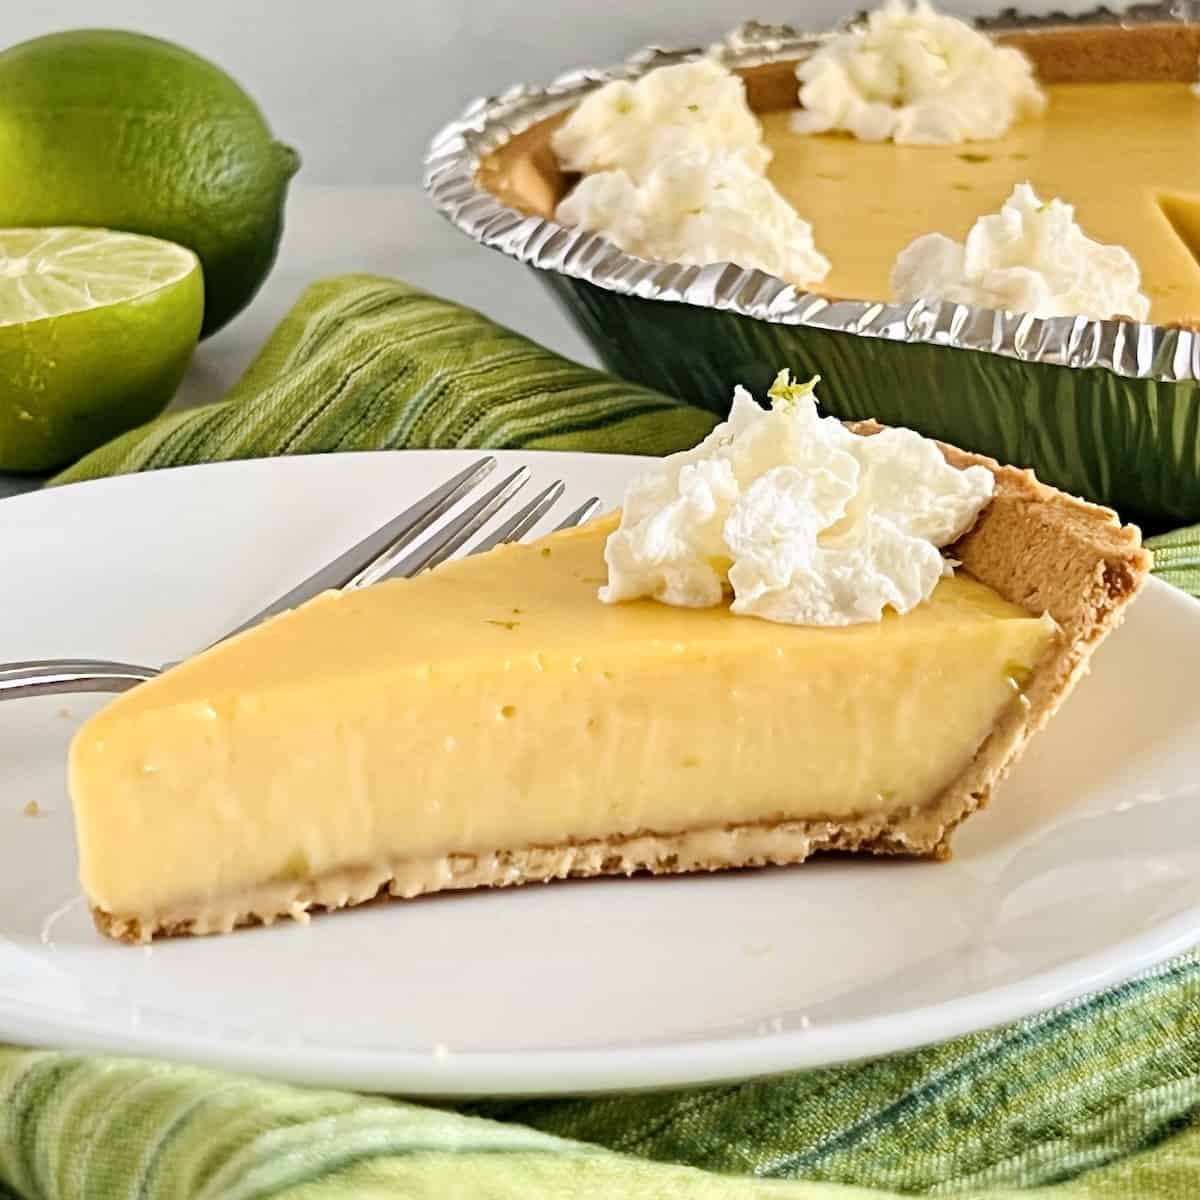 Graham cracker crust filled with key lime pie filling and topped with whipped cream on a plate with a fork.